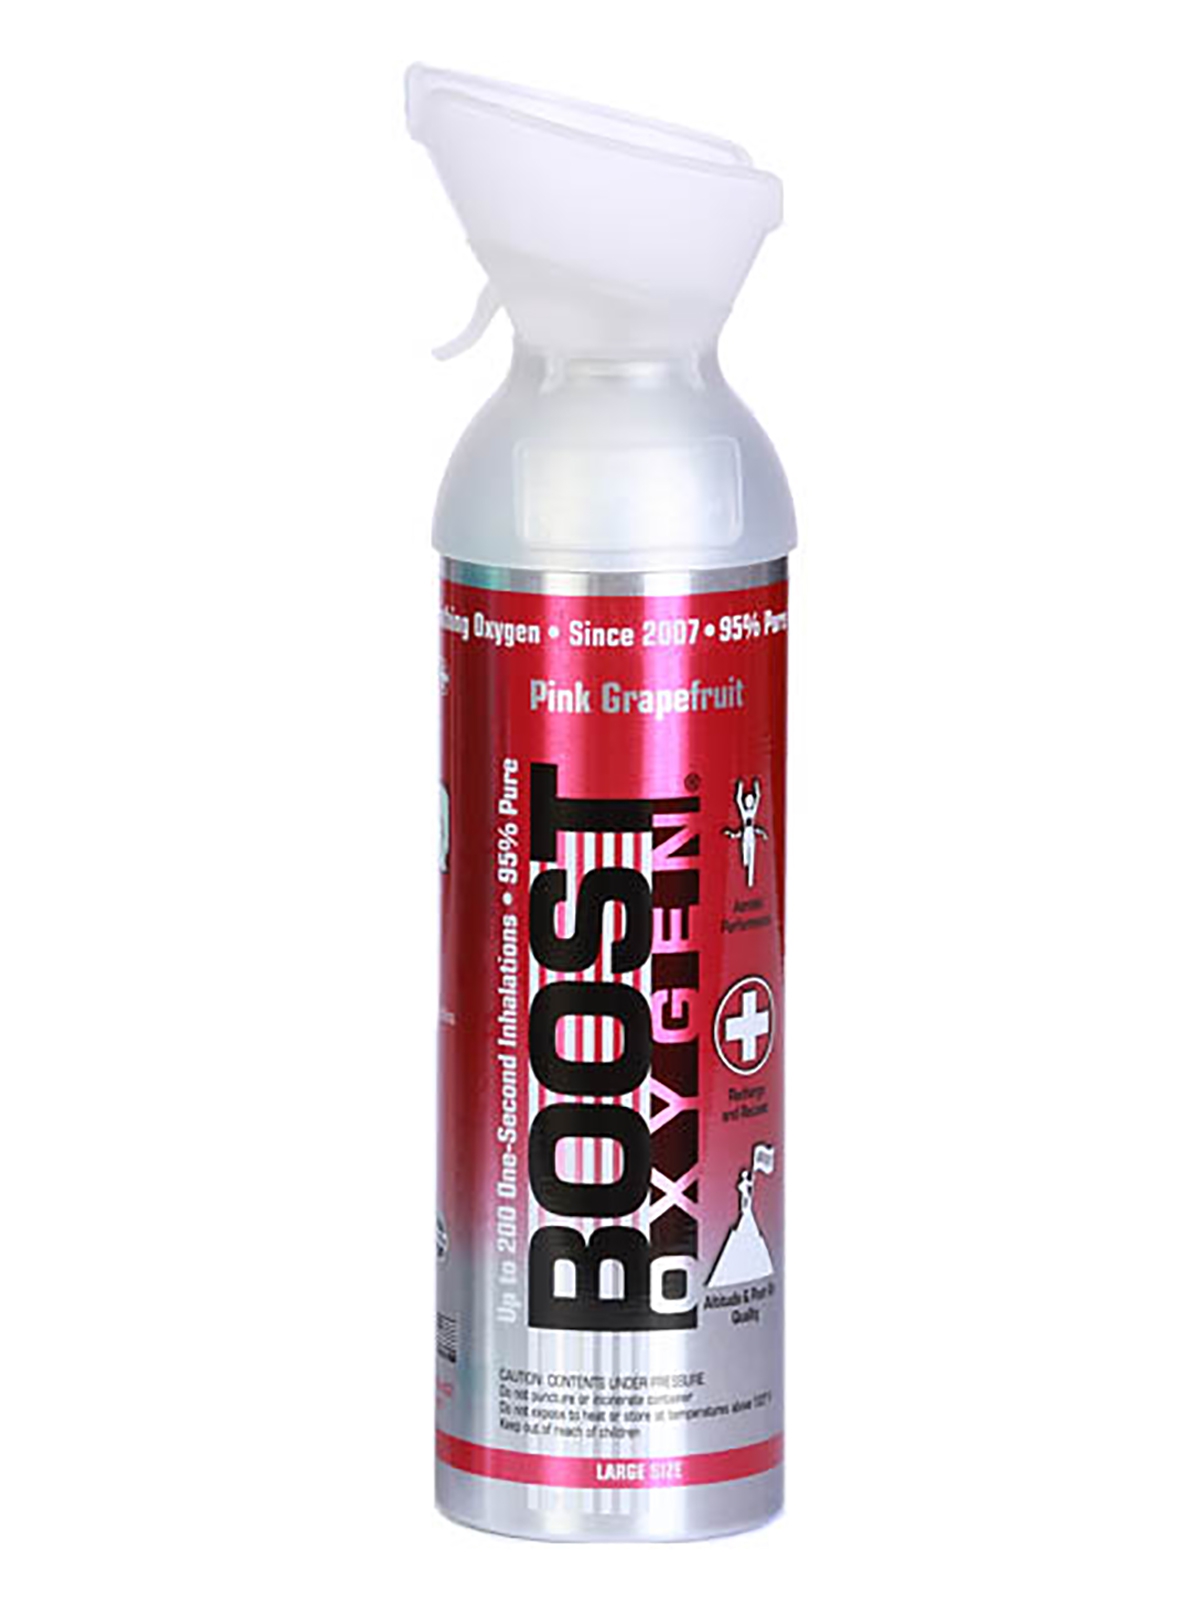 Boost Oxygen Pink Grapefruit - 95% pure oxygen with taste, 9 liters can